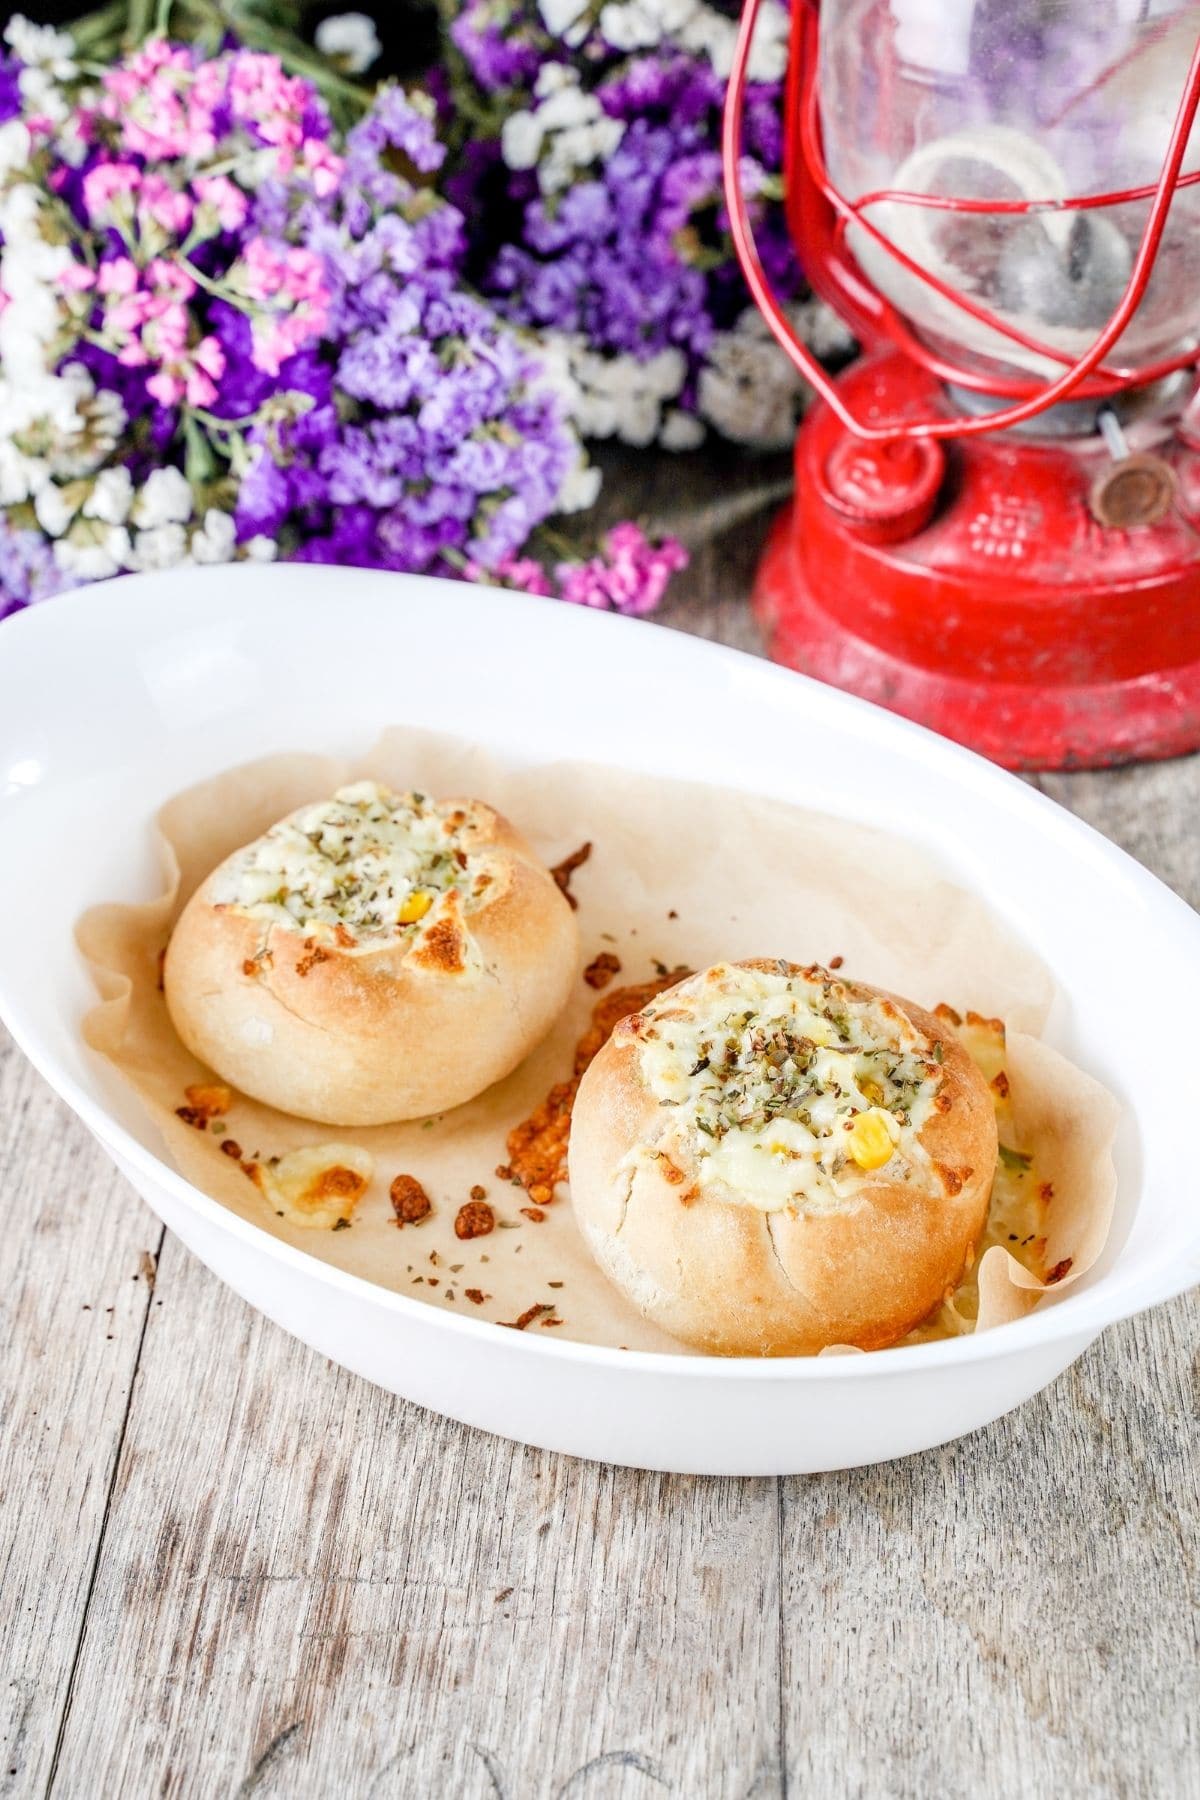 oval white baking dish with two pizza buns inside on table with red lantern and purple flowers